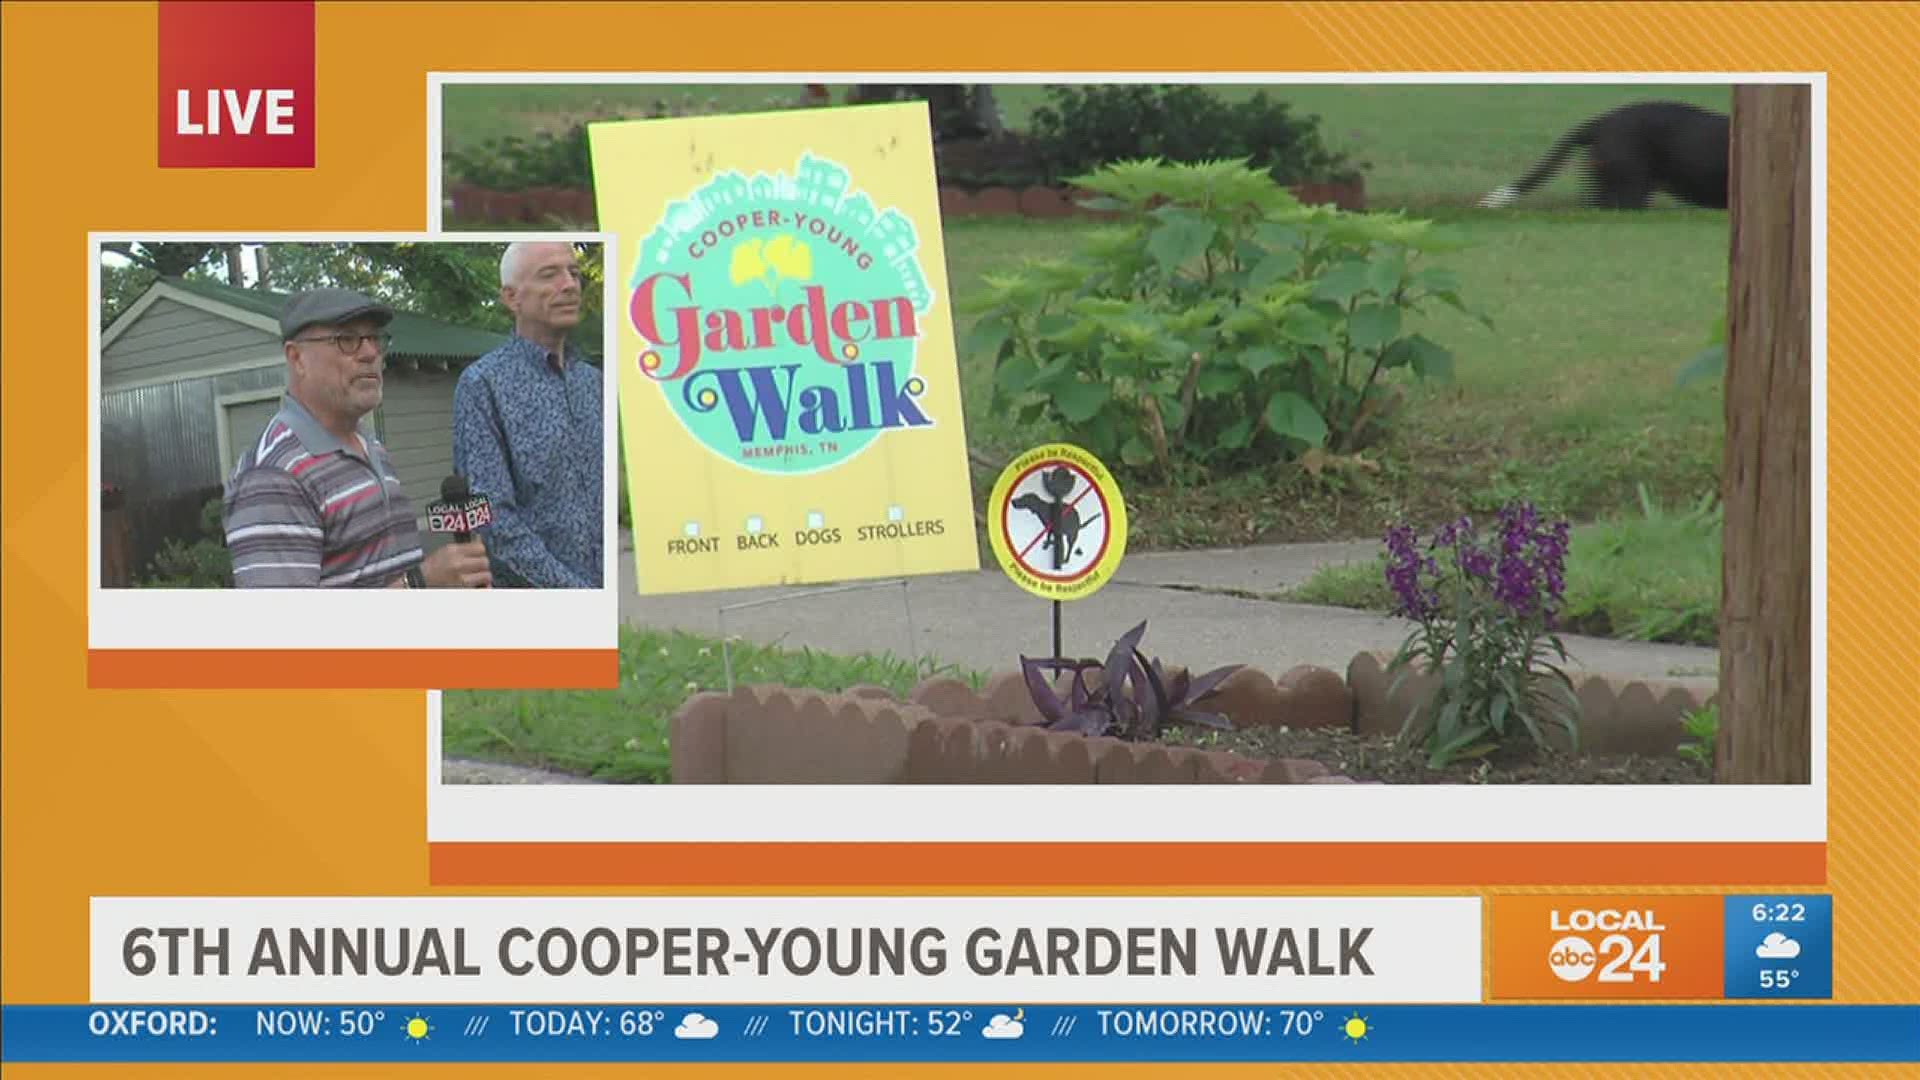 The Cooper-Young Garden Walk is returning for its 6th year this Saturday and Sunday